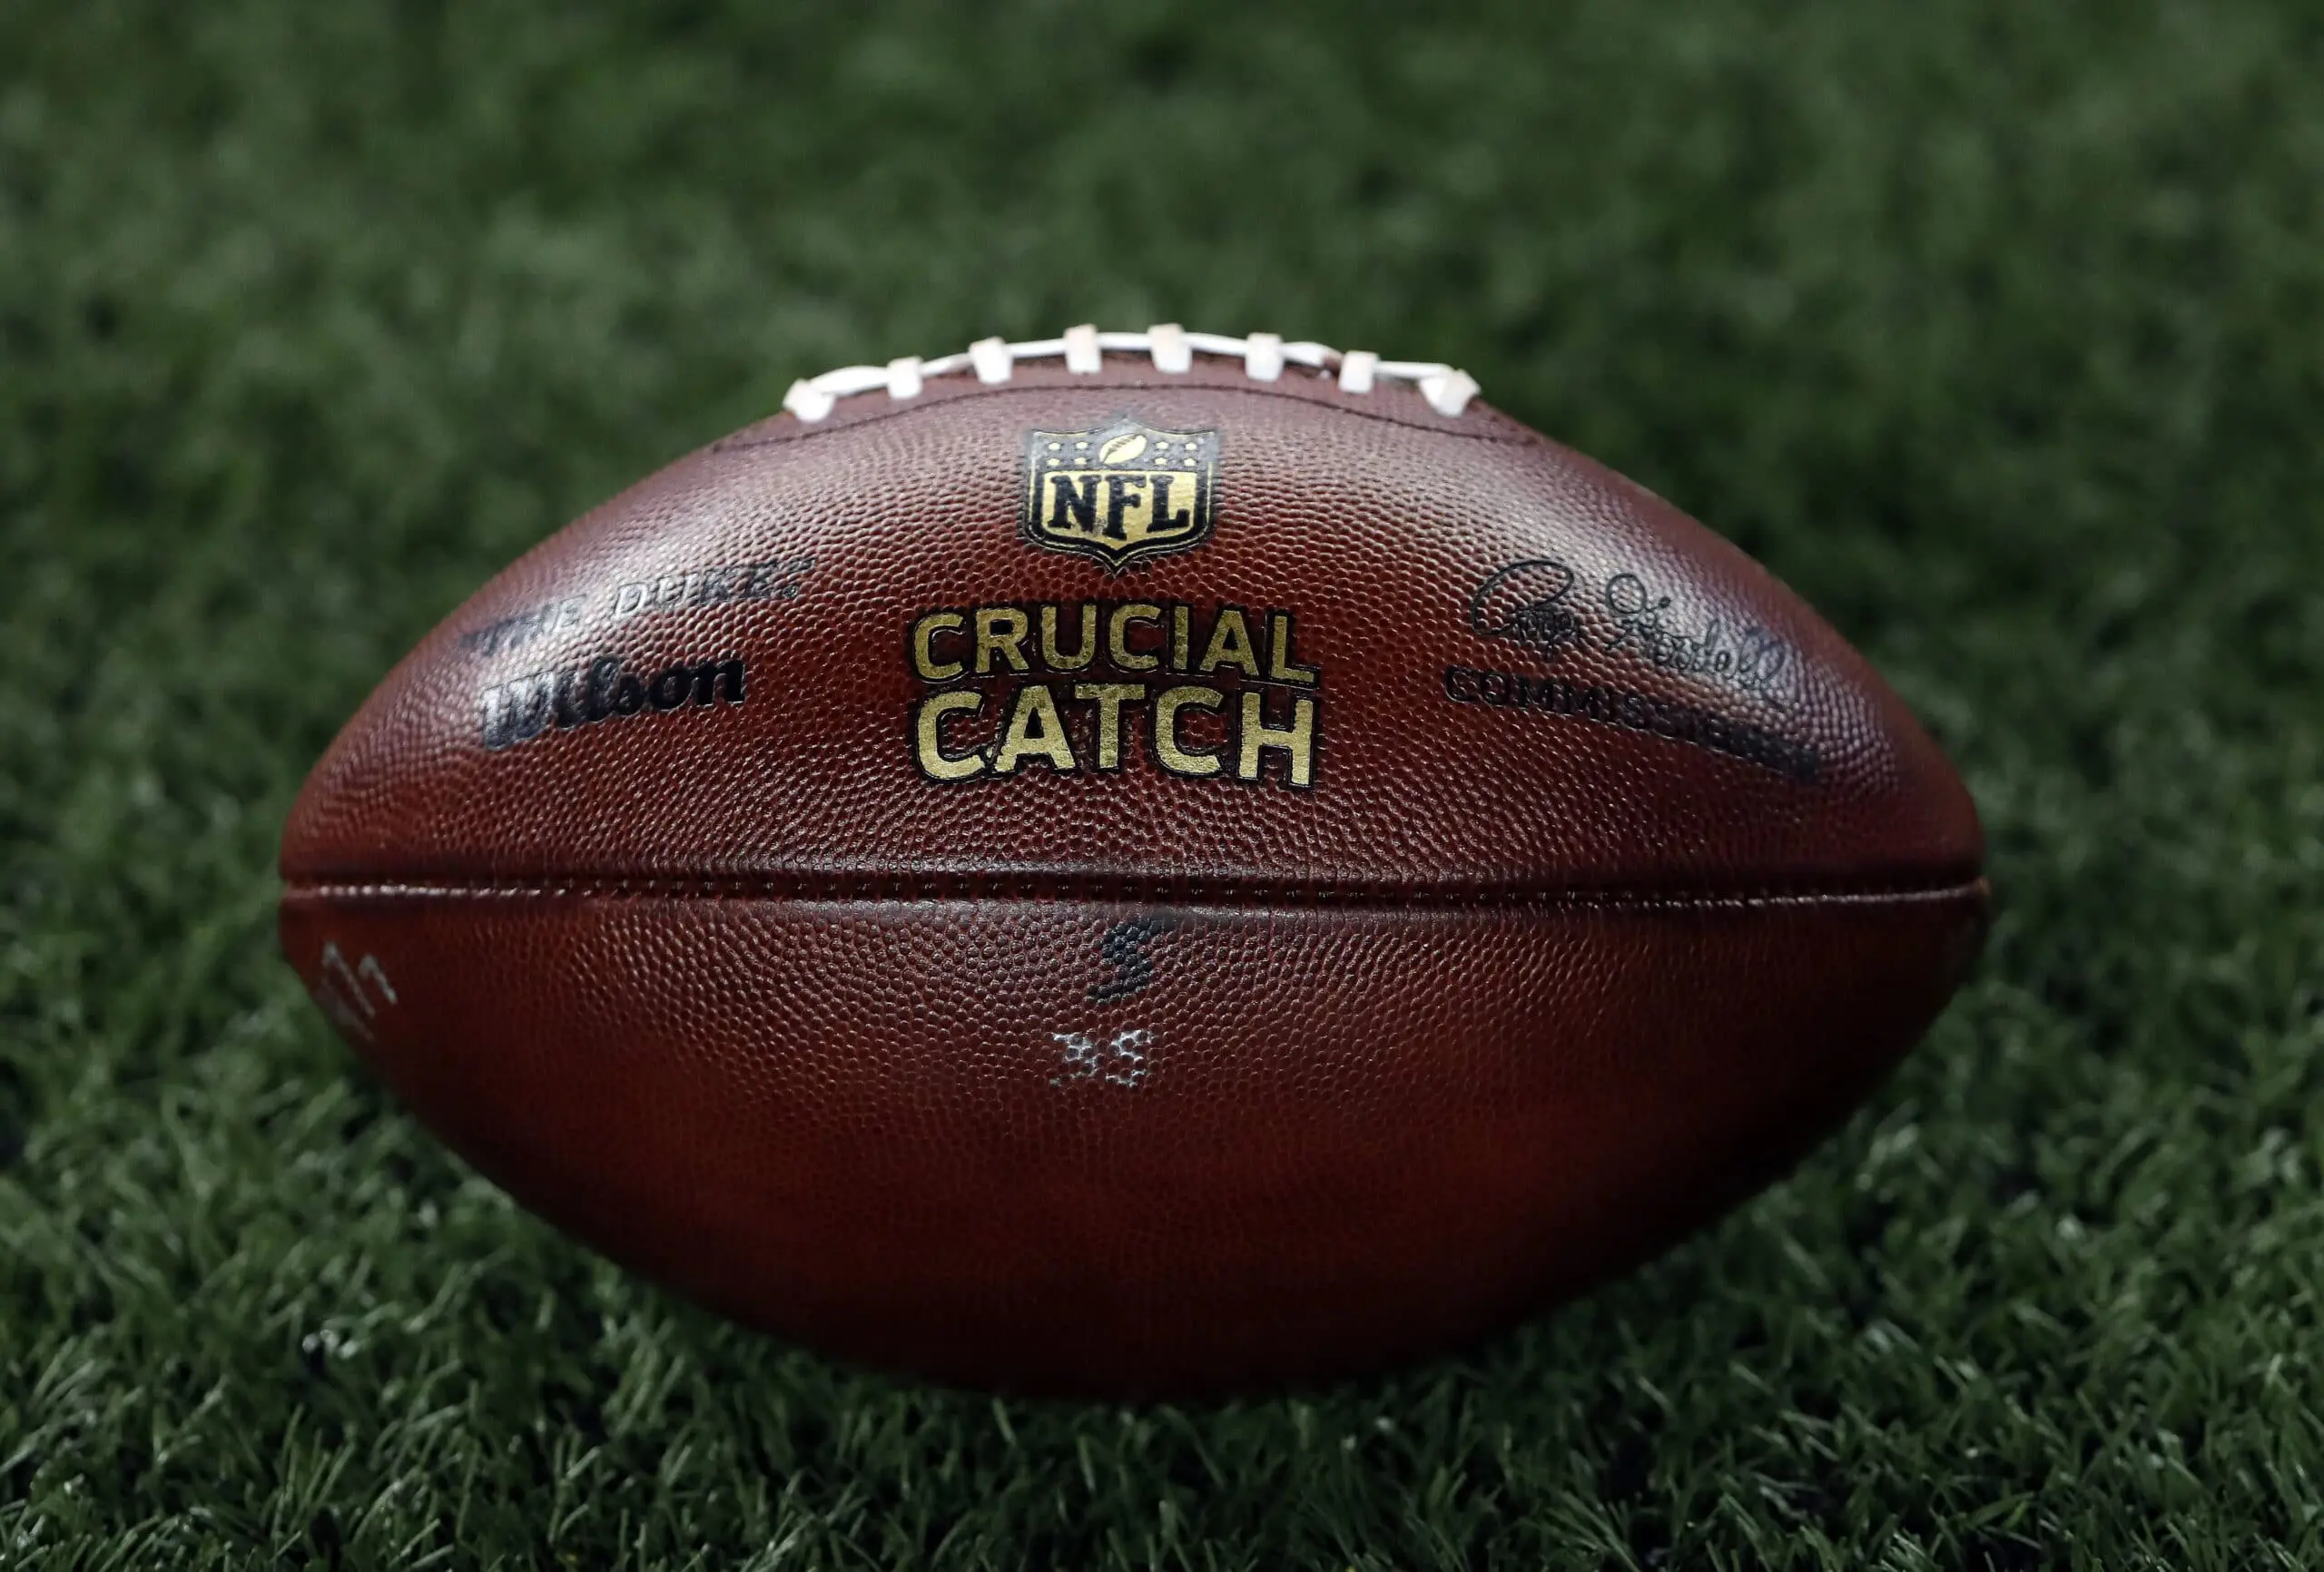 NFL's Crucial Catch Brings Awareness To The Importance Of Catching